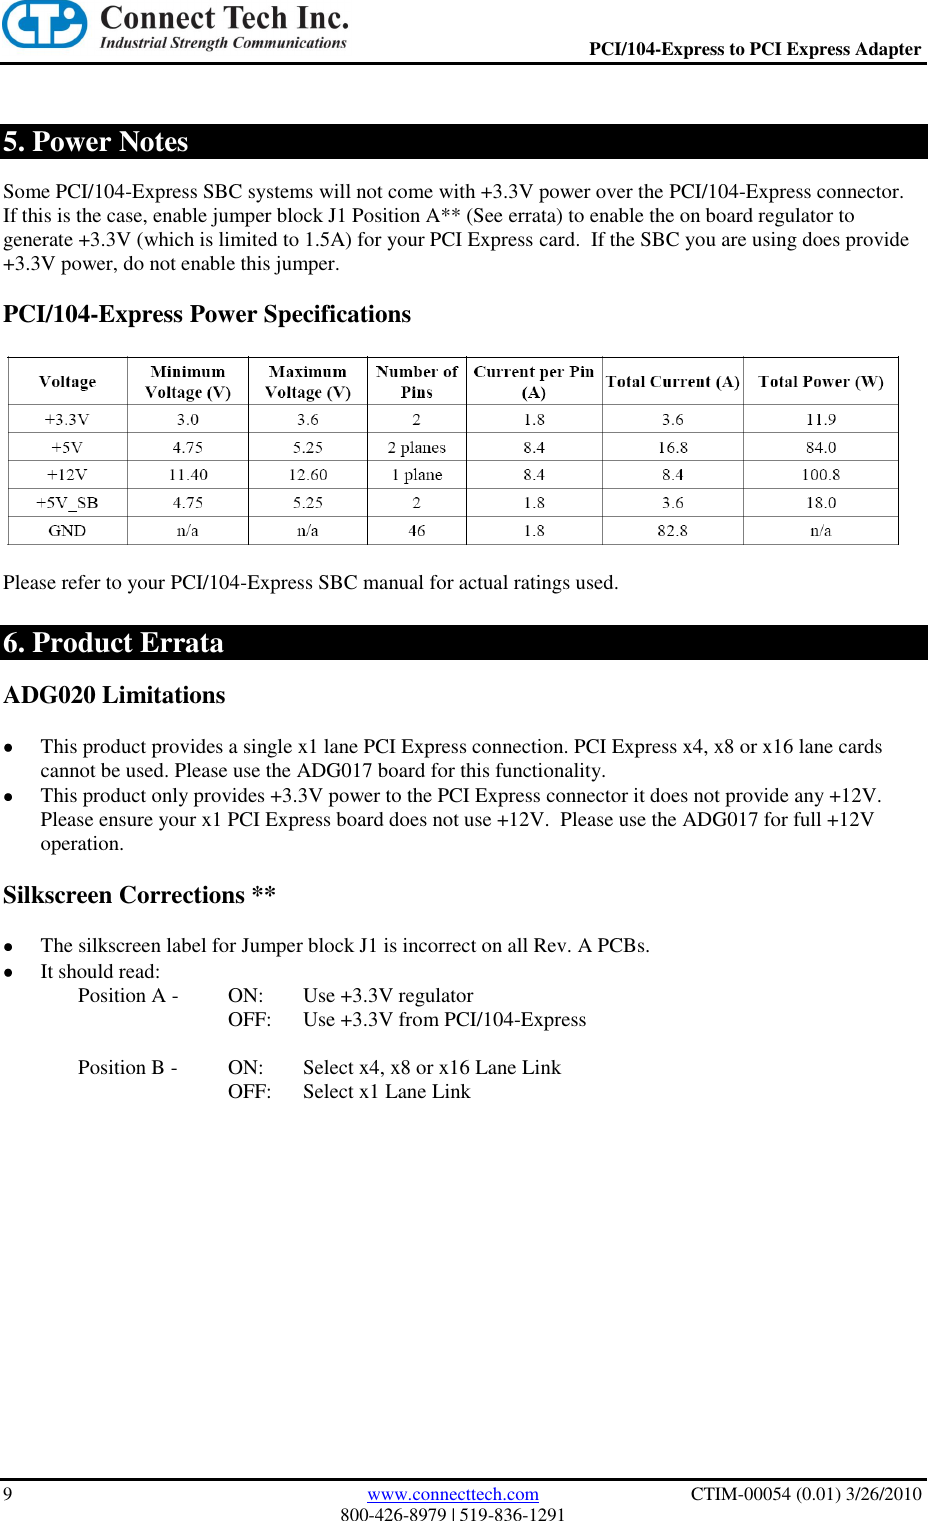 Page 9 of 10 - Connect-Tech Connect-Tech-Ctim-00054-Users-Manual- PCI-104/Express To PCI Express Adapter User Manual  Connect-tech-ctim-00054-users-manual